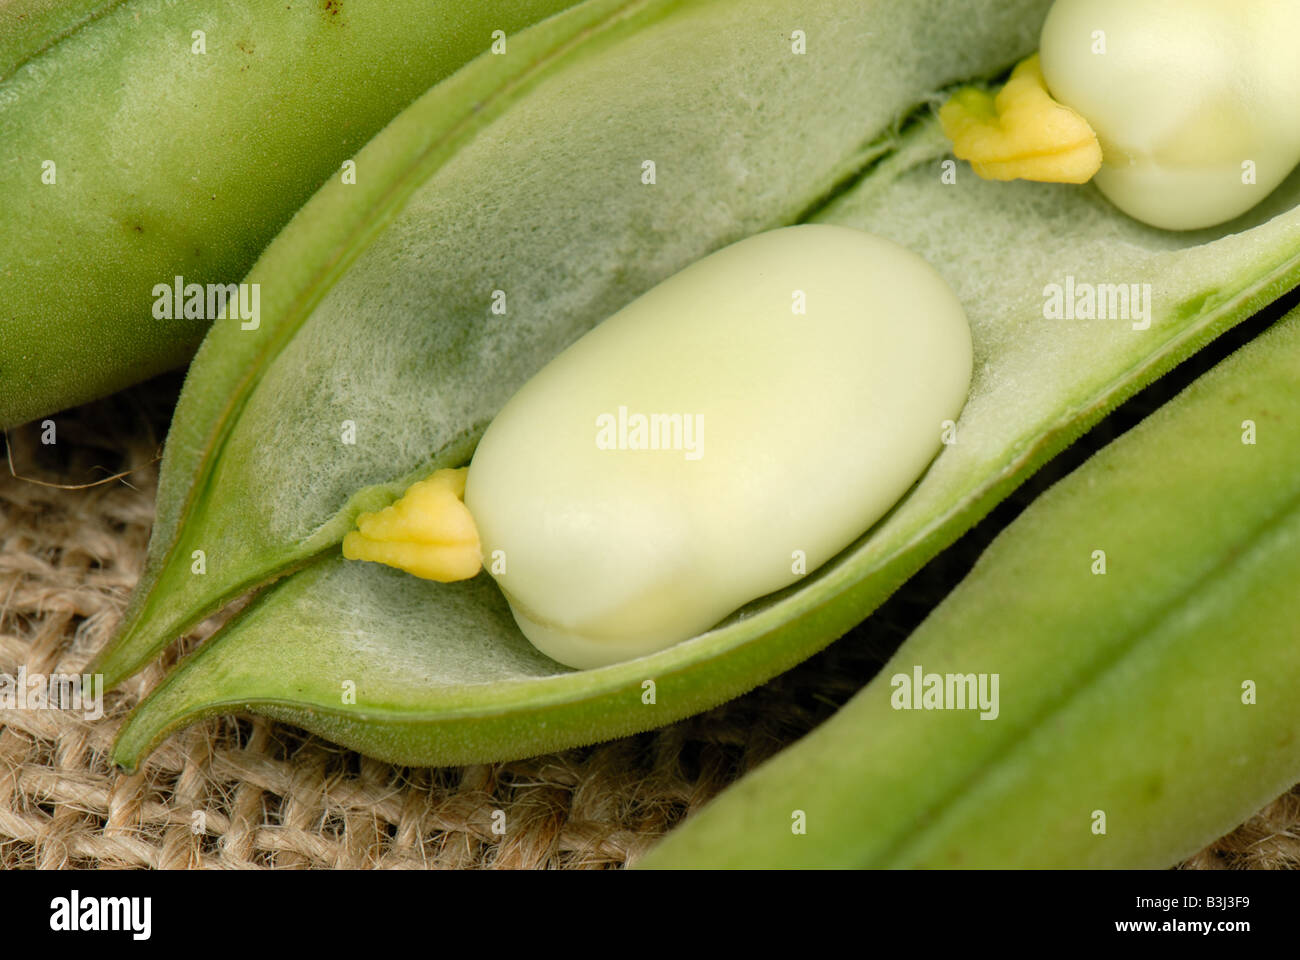 Broad bean pod opened to show fresh green broad beans felt lined pod Stock Photo